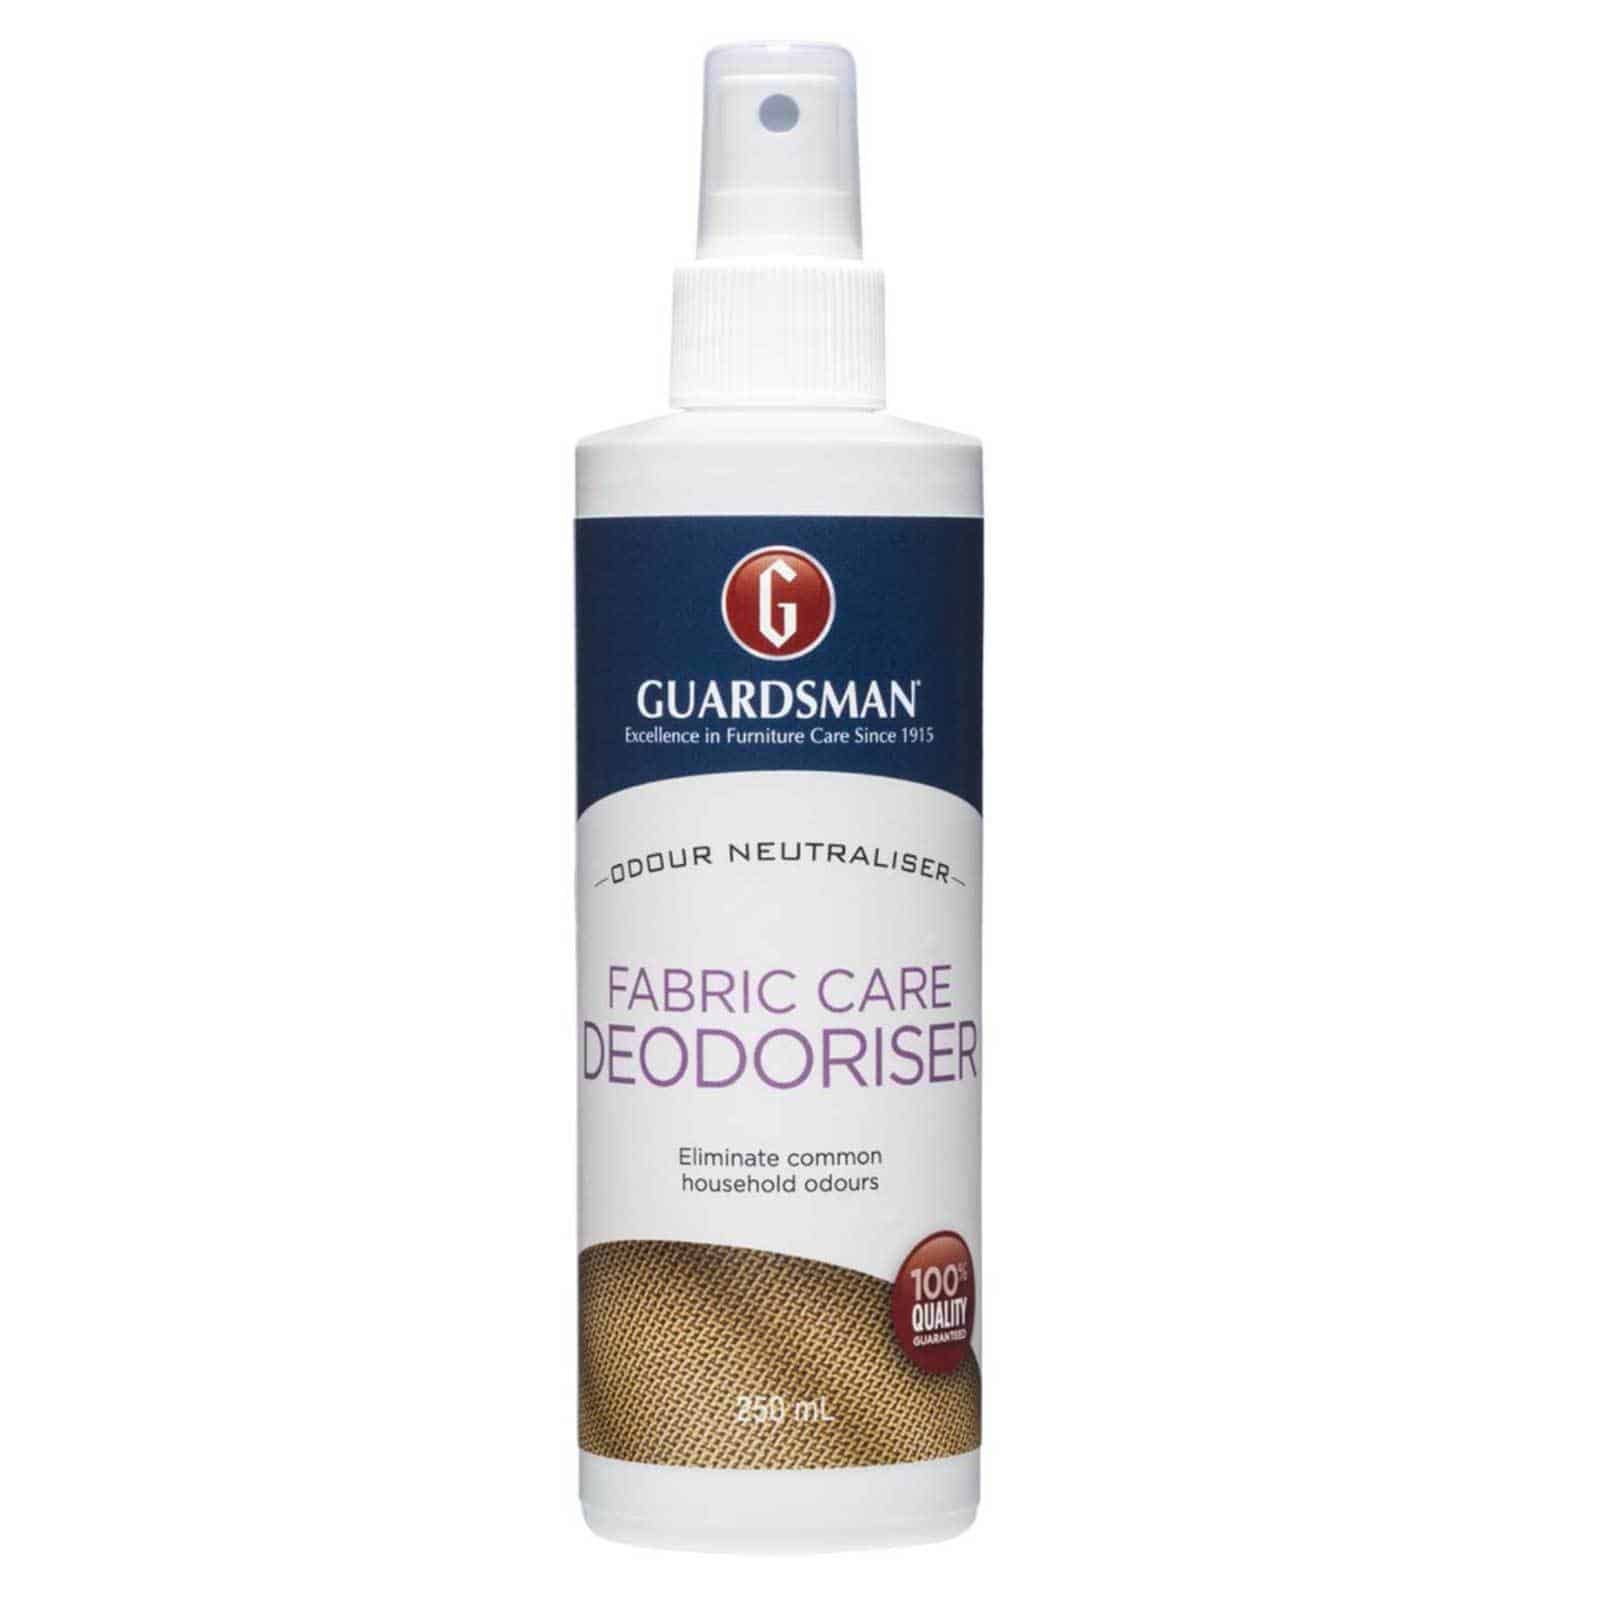 A white and blue colour bottle which is a Fabric Care Deodoriser by Guardsman